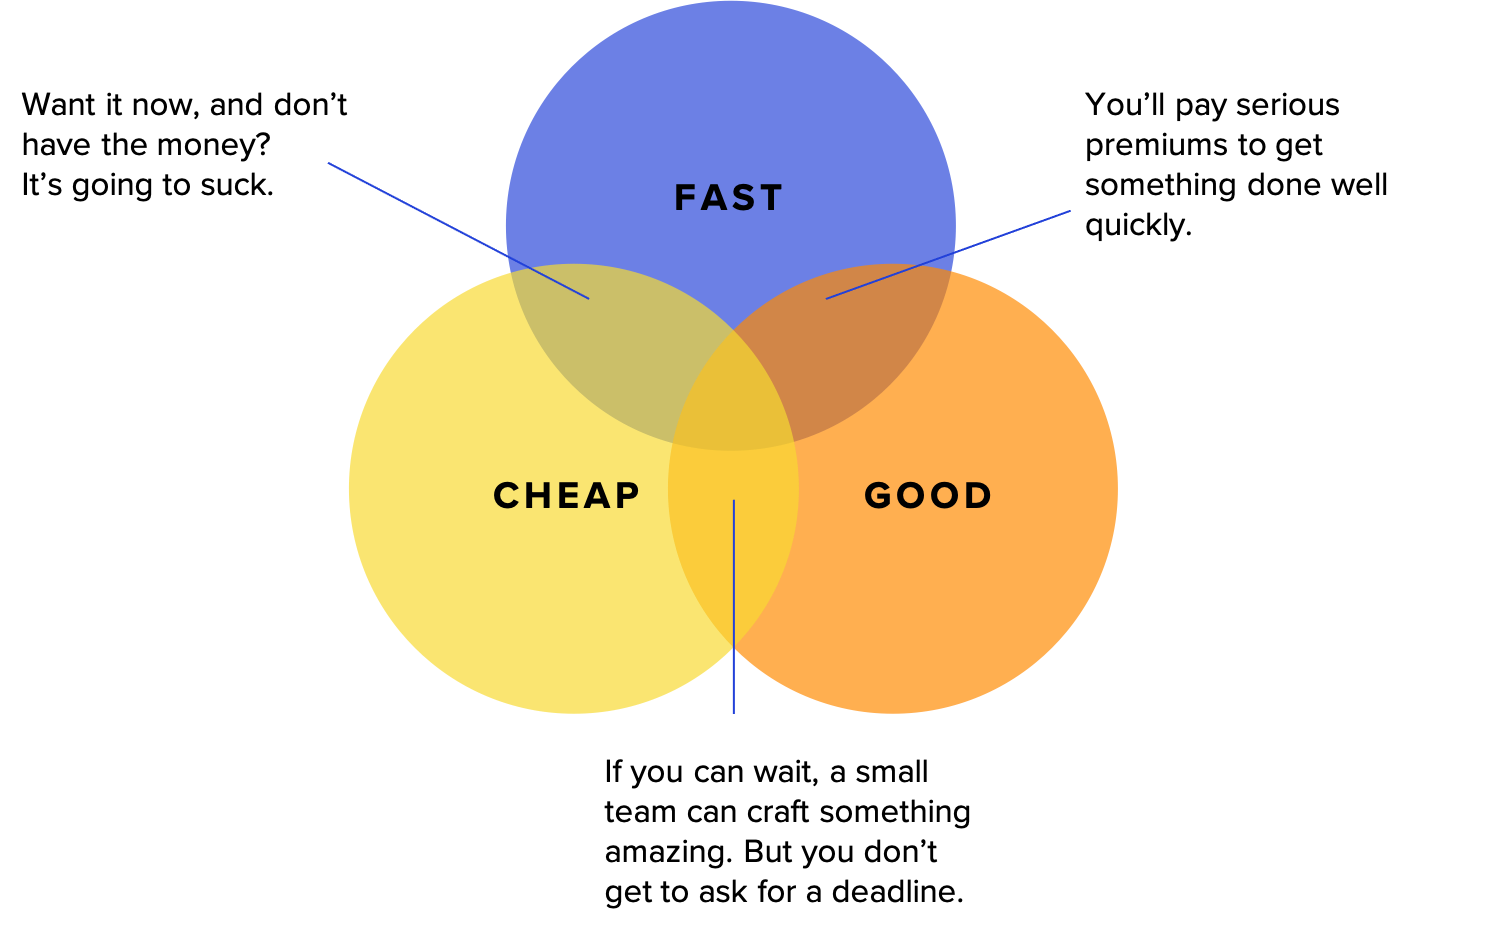 The diagram shows three overlapping circles representing good fast and cheap.  The intersection of fast and cheap is labelled Want it now, and don’t have the money? It’s going to suck.  The intersection of fast and good is labelled You’ll pay serious premiums to get something done well quickly.  The intersection of good and cheap is labelled If you can wait, a small team can craft something amazing. But you don’t get to ask for a deadline. 
